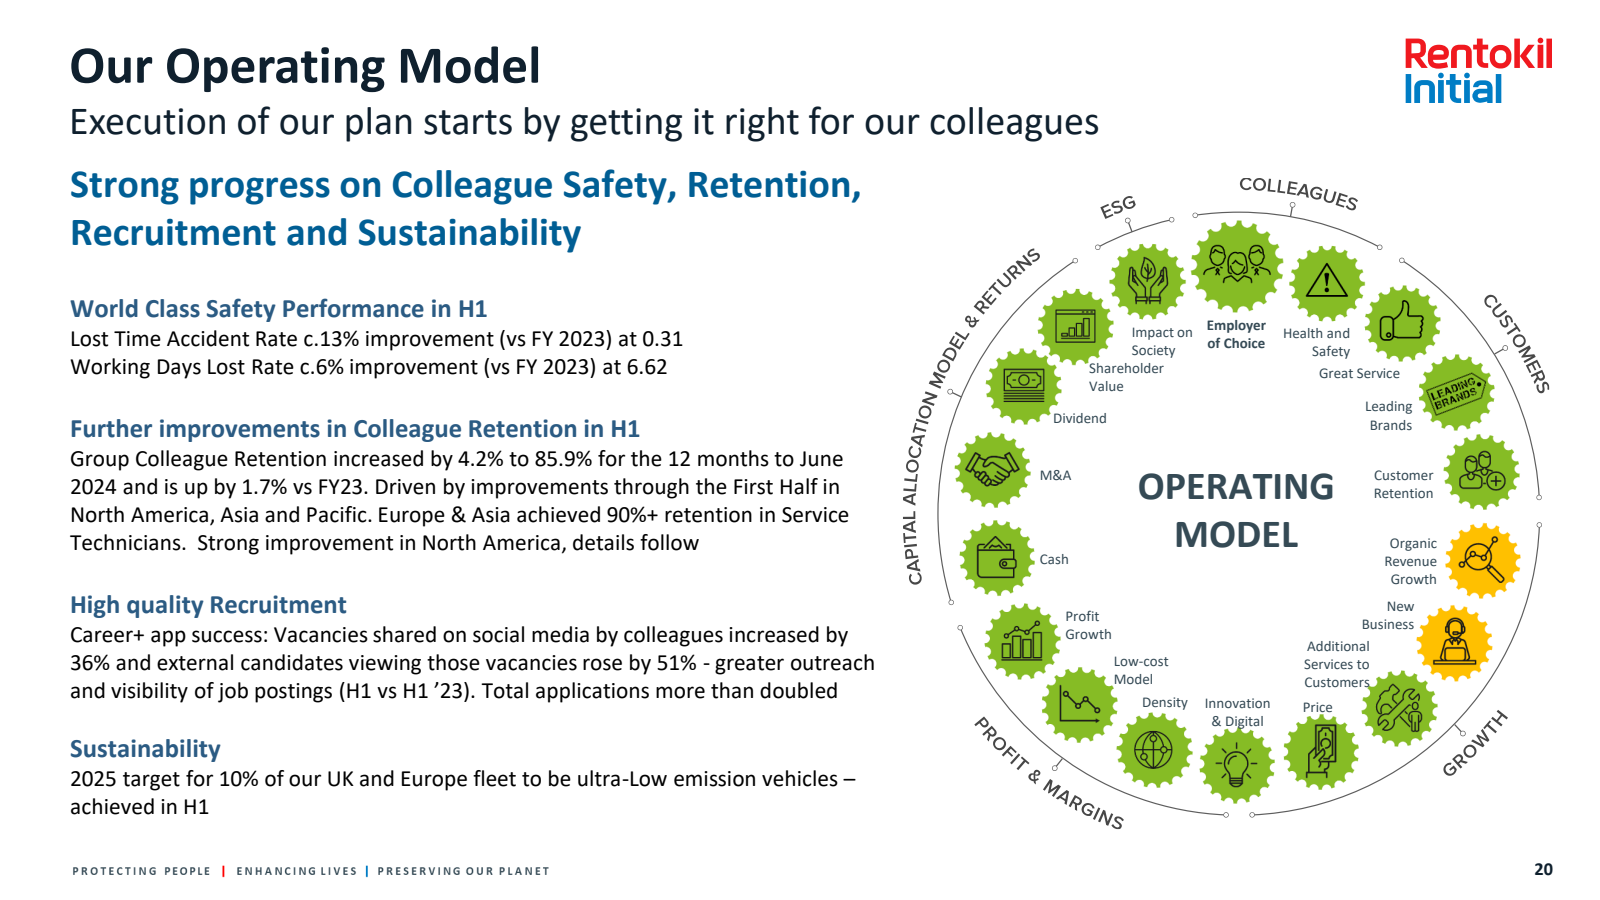 Our Operating Model 